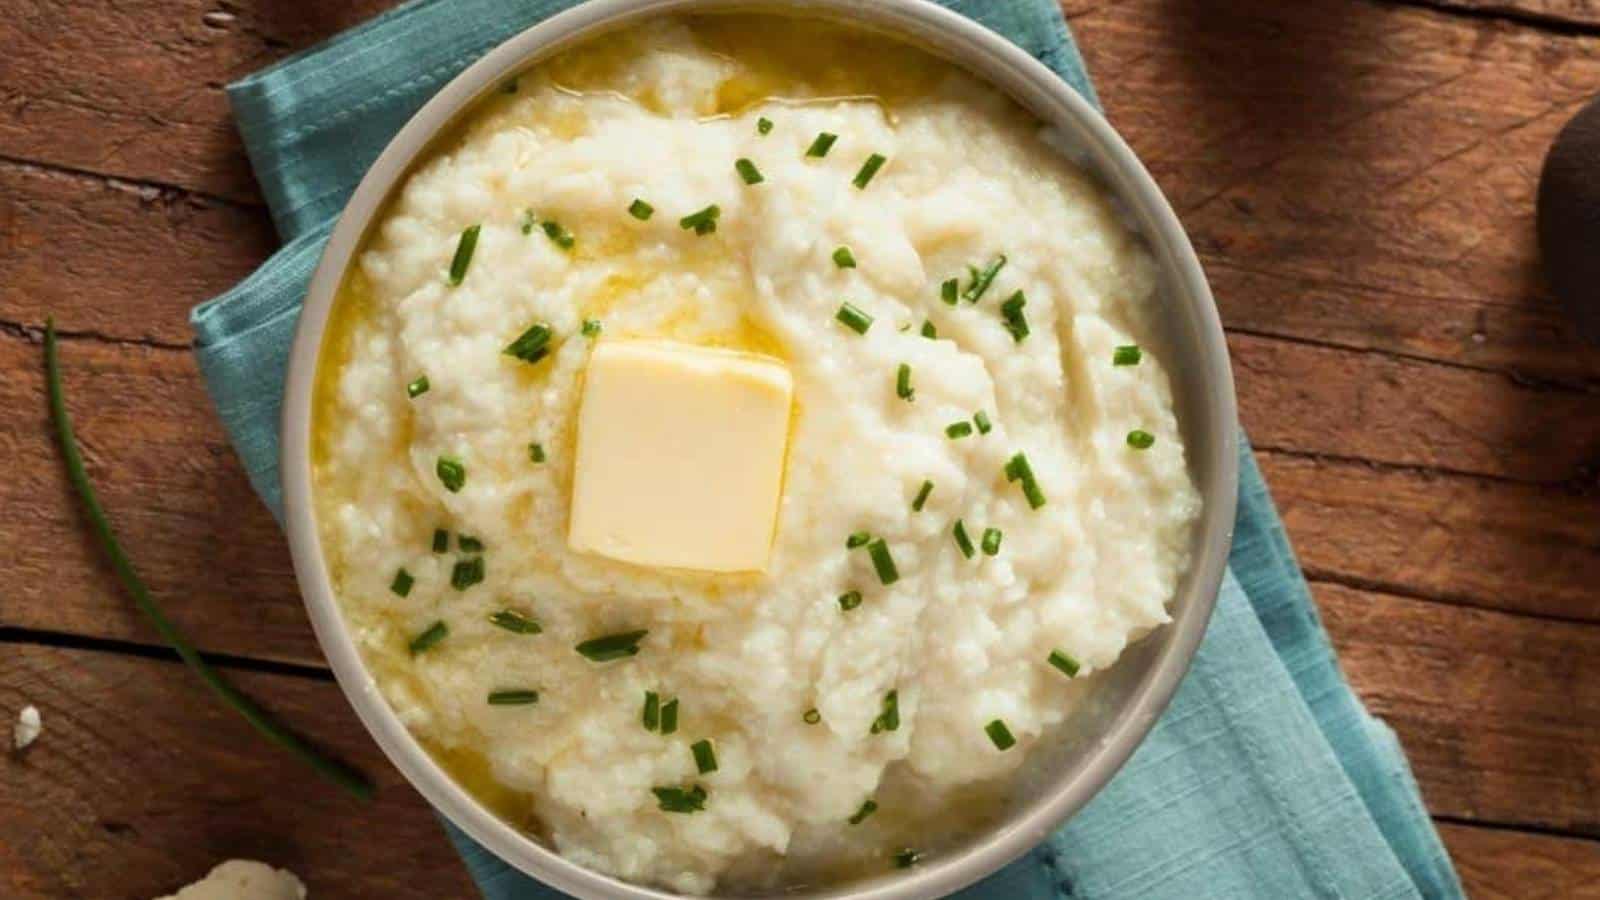 A picture of mashed cauliflower potatoes with butter.